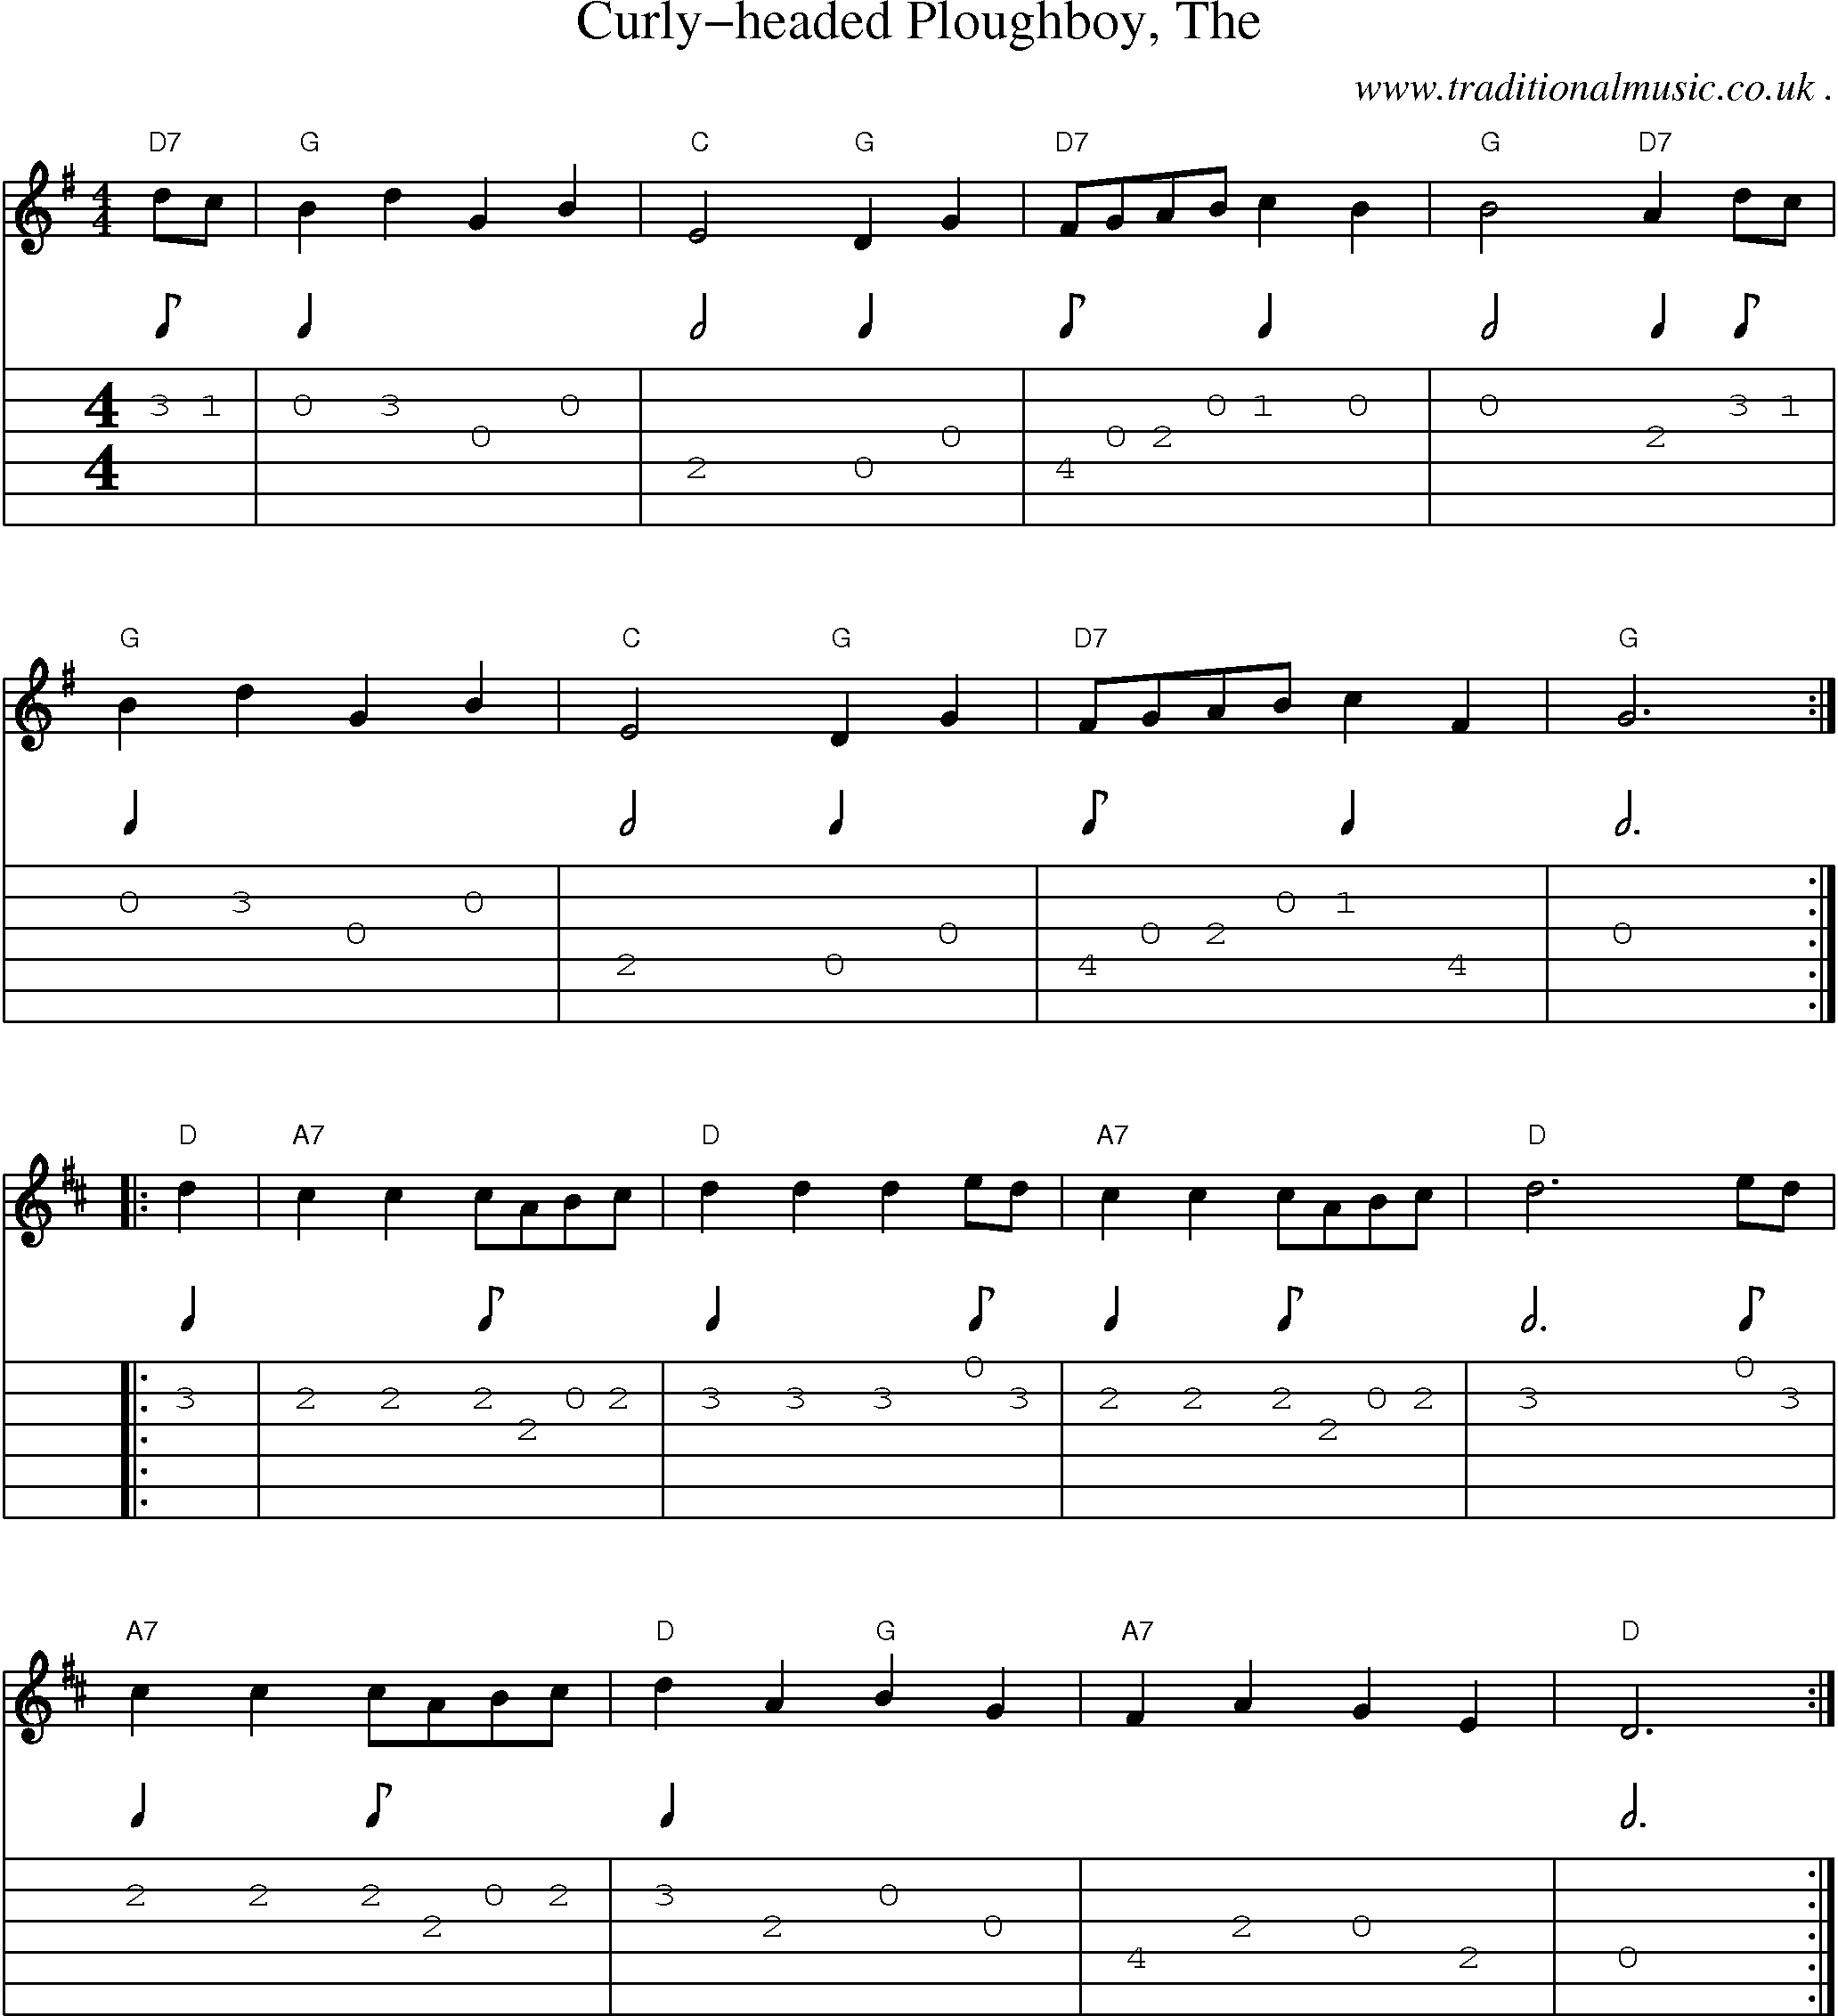 Music Score and Guitar Tabs for Curly-headed Ploughboy The1